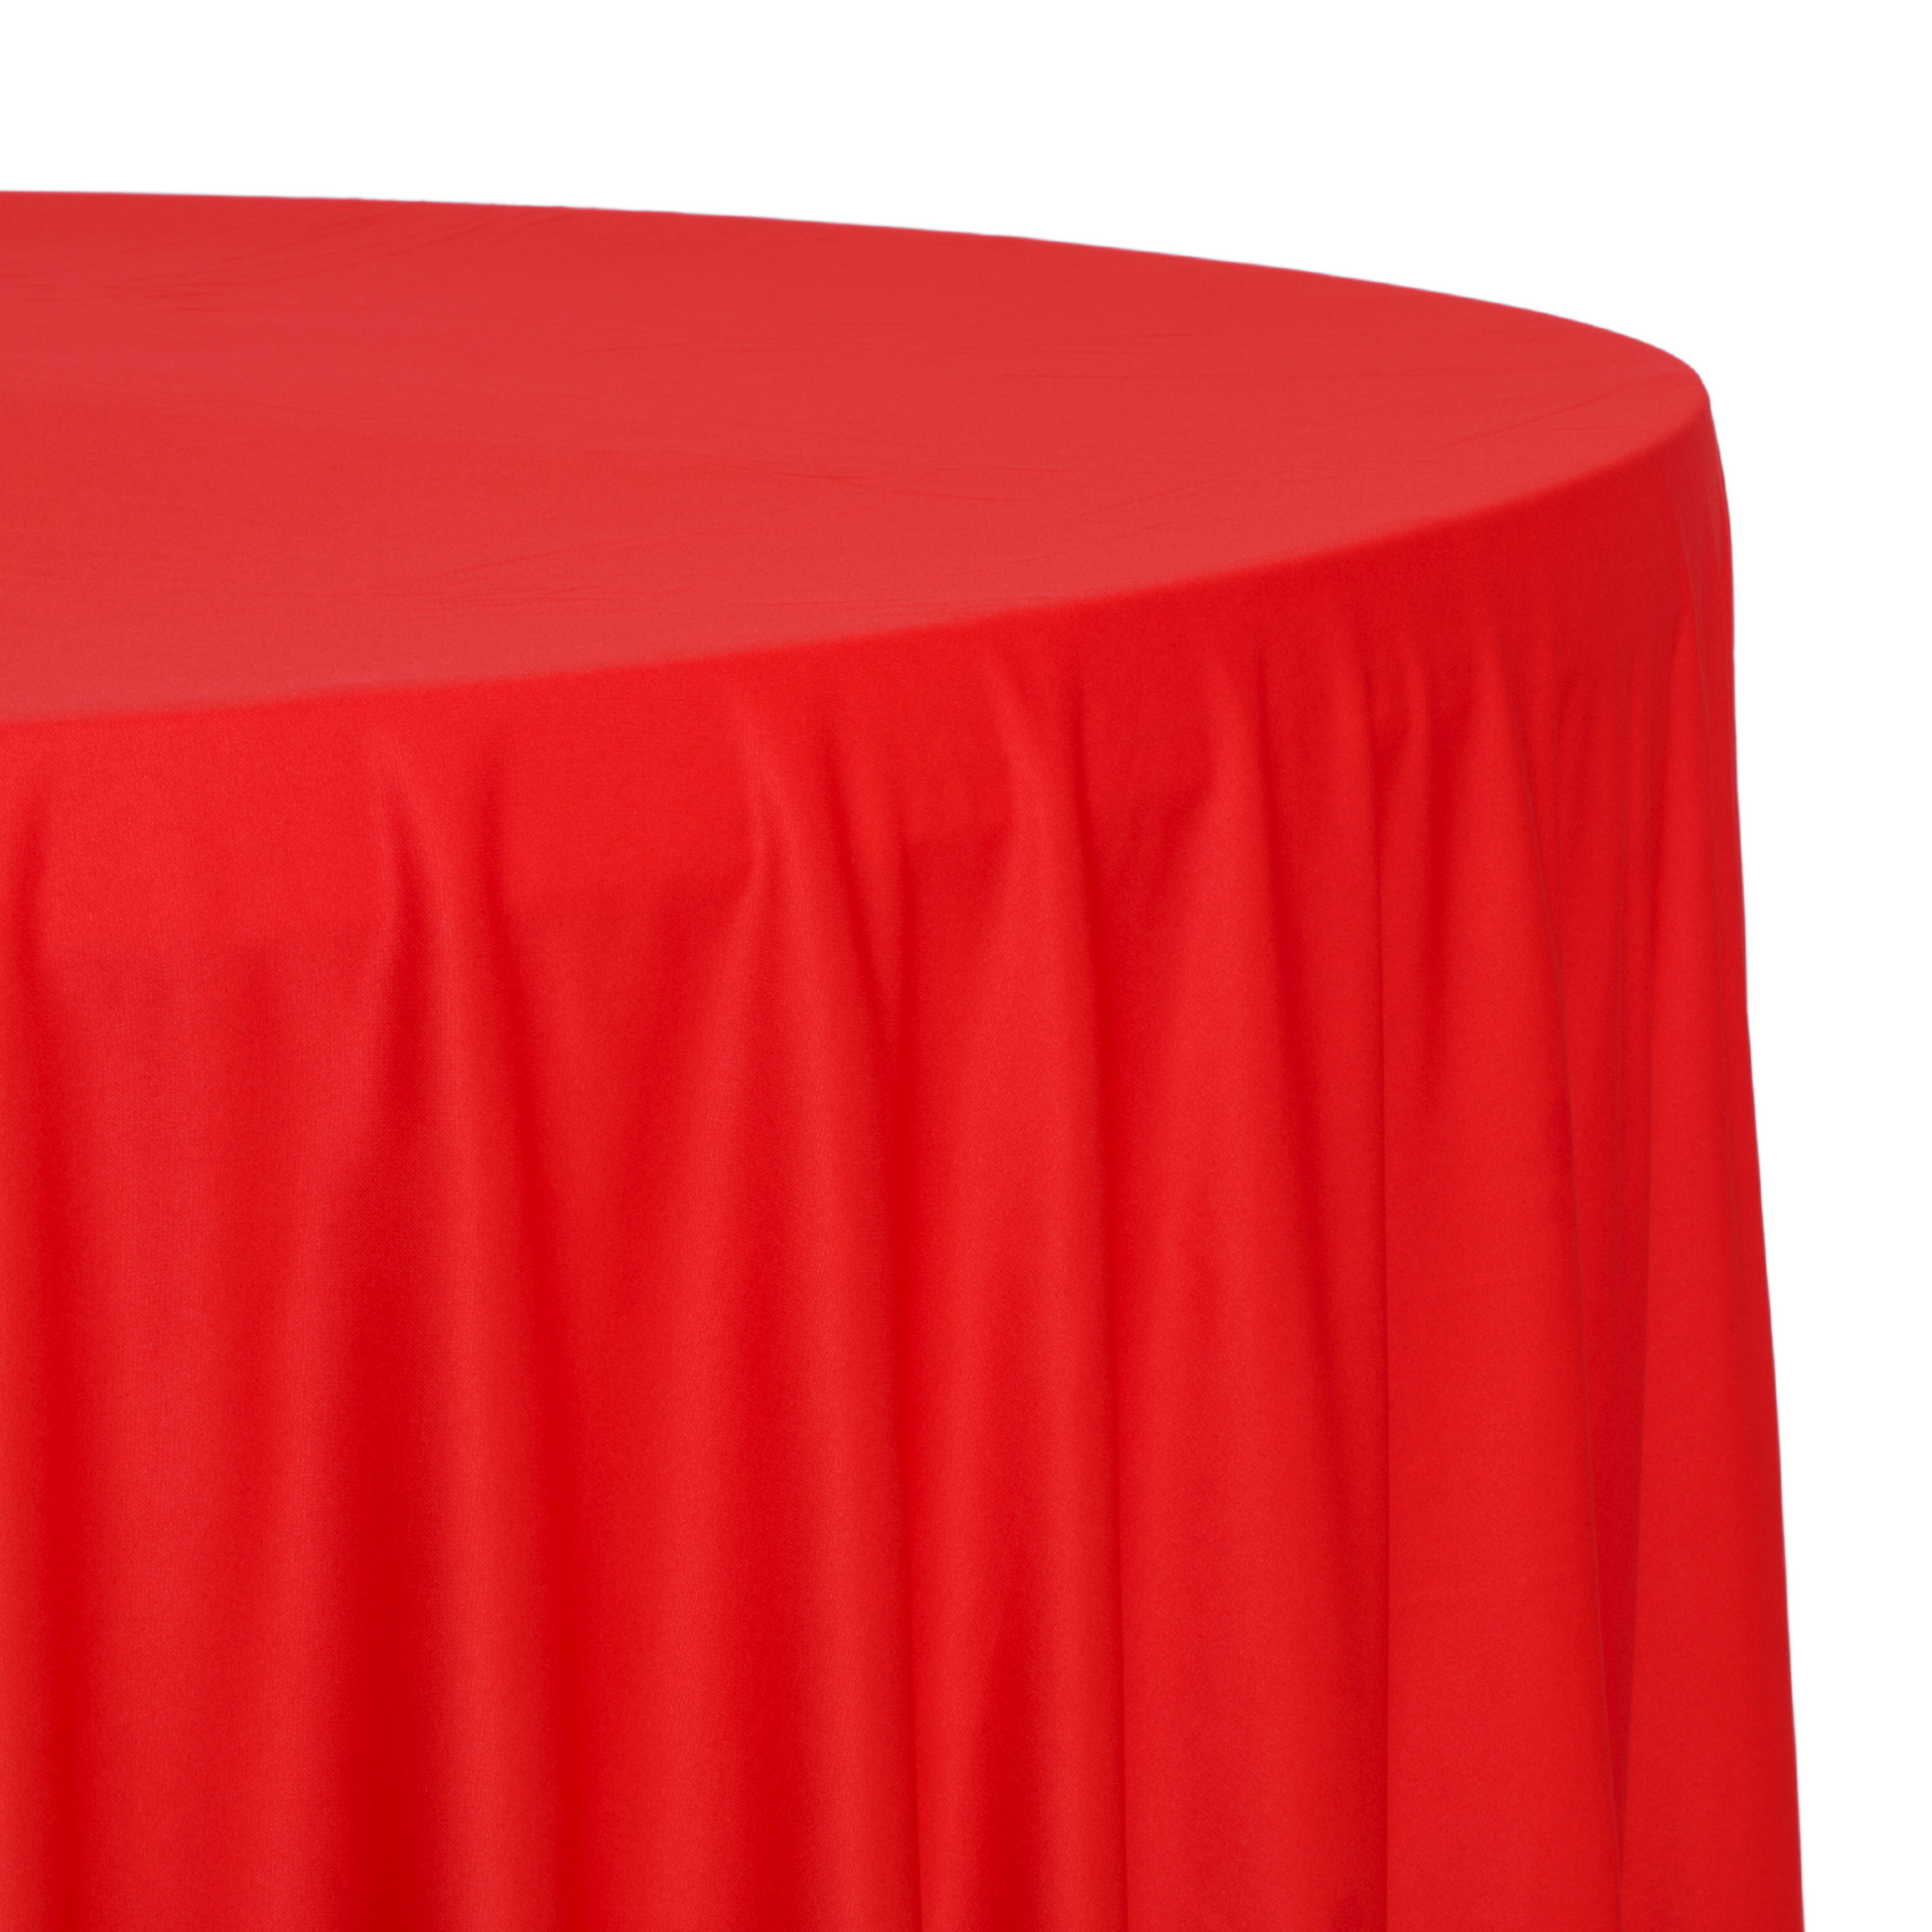 Scuba 120" Round Tablecloth - Red